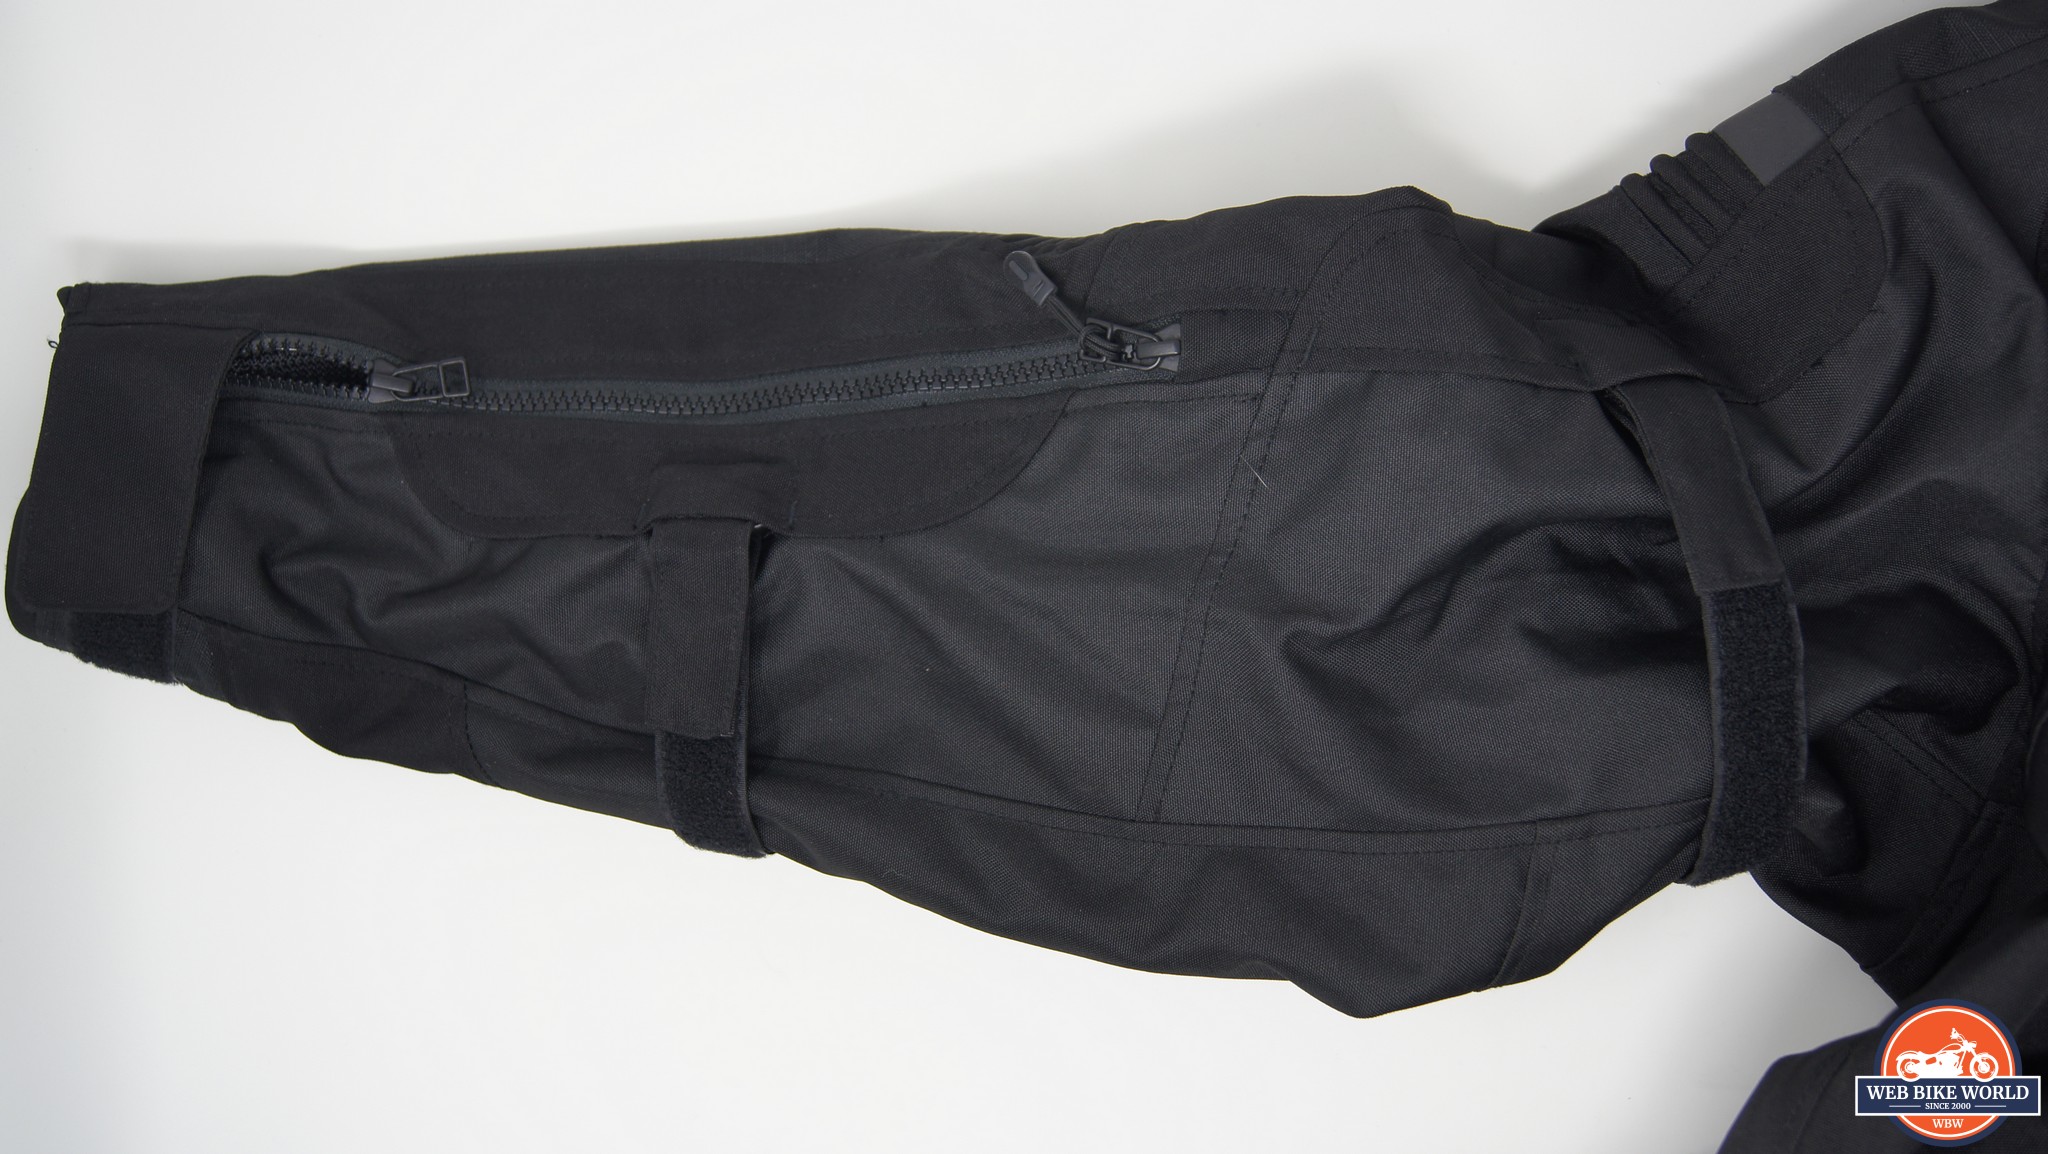 Closeup of the right sleeve on the Richa Brutus GTX Jacket